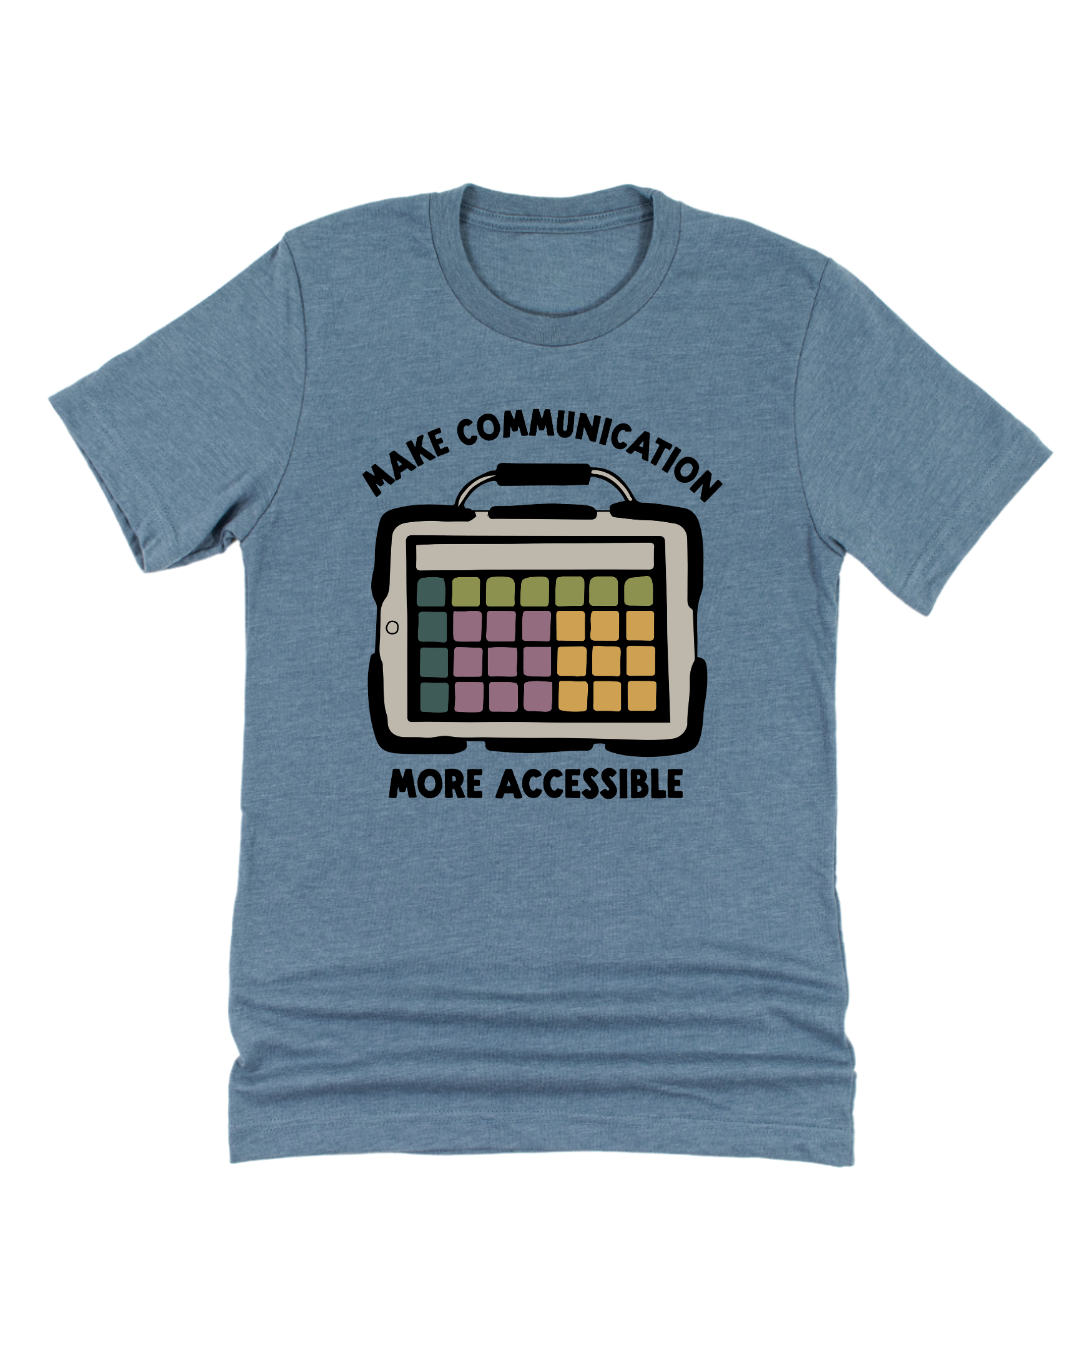 Make Communication More Accessible Tee